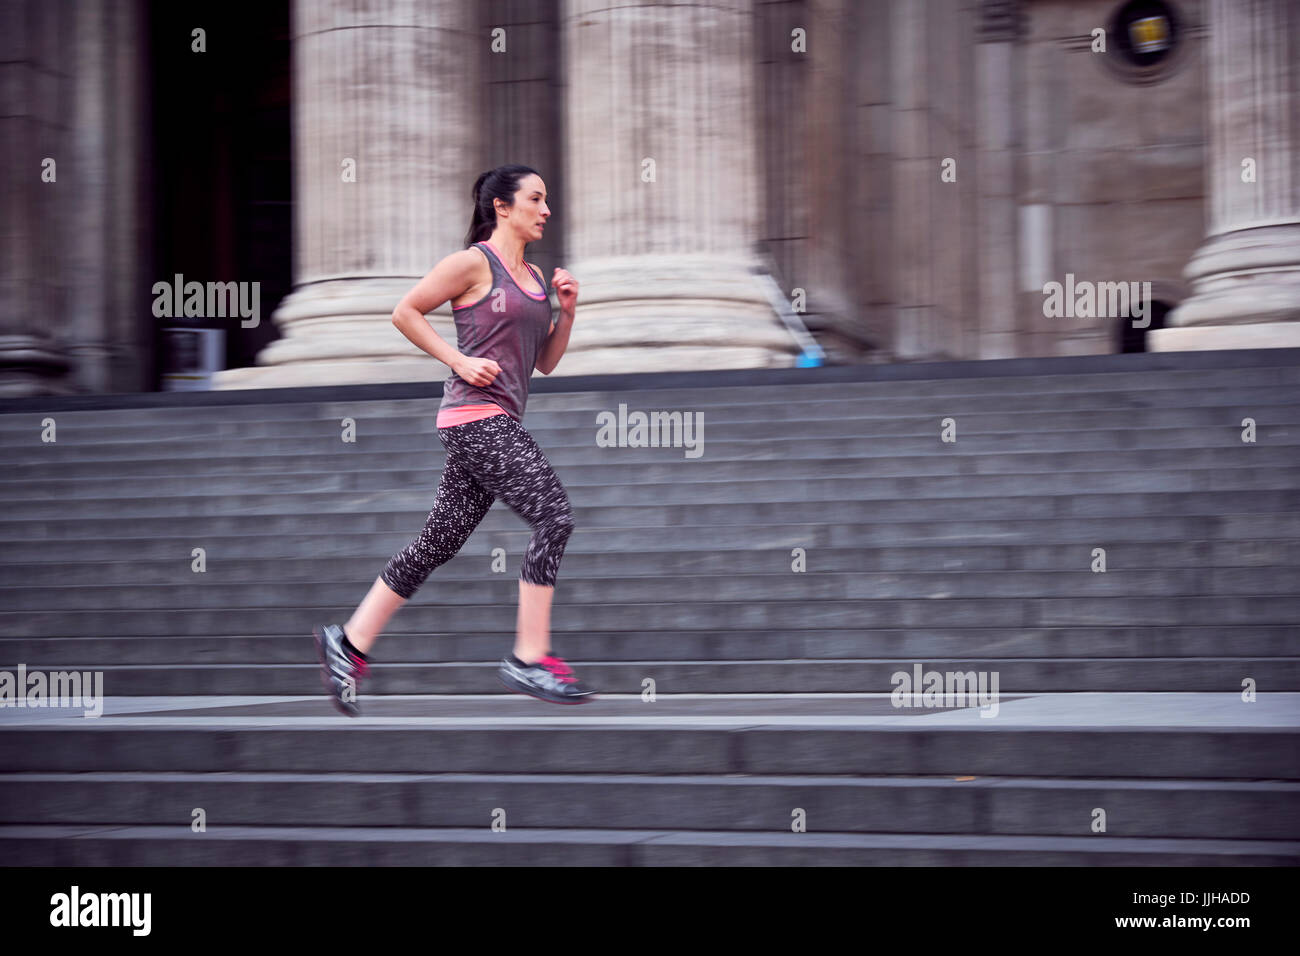 A woman running in the St Paul's area of London. Stock Photo